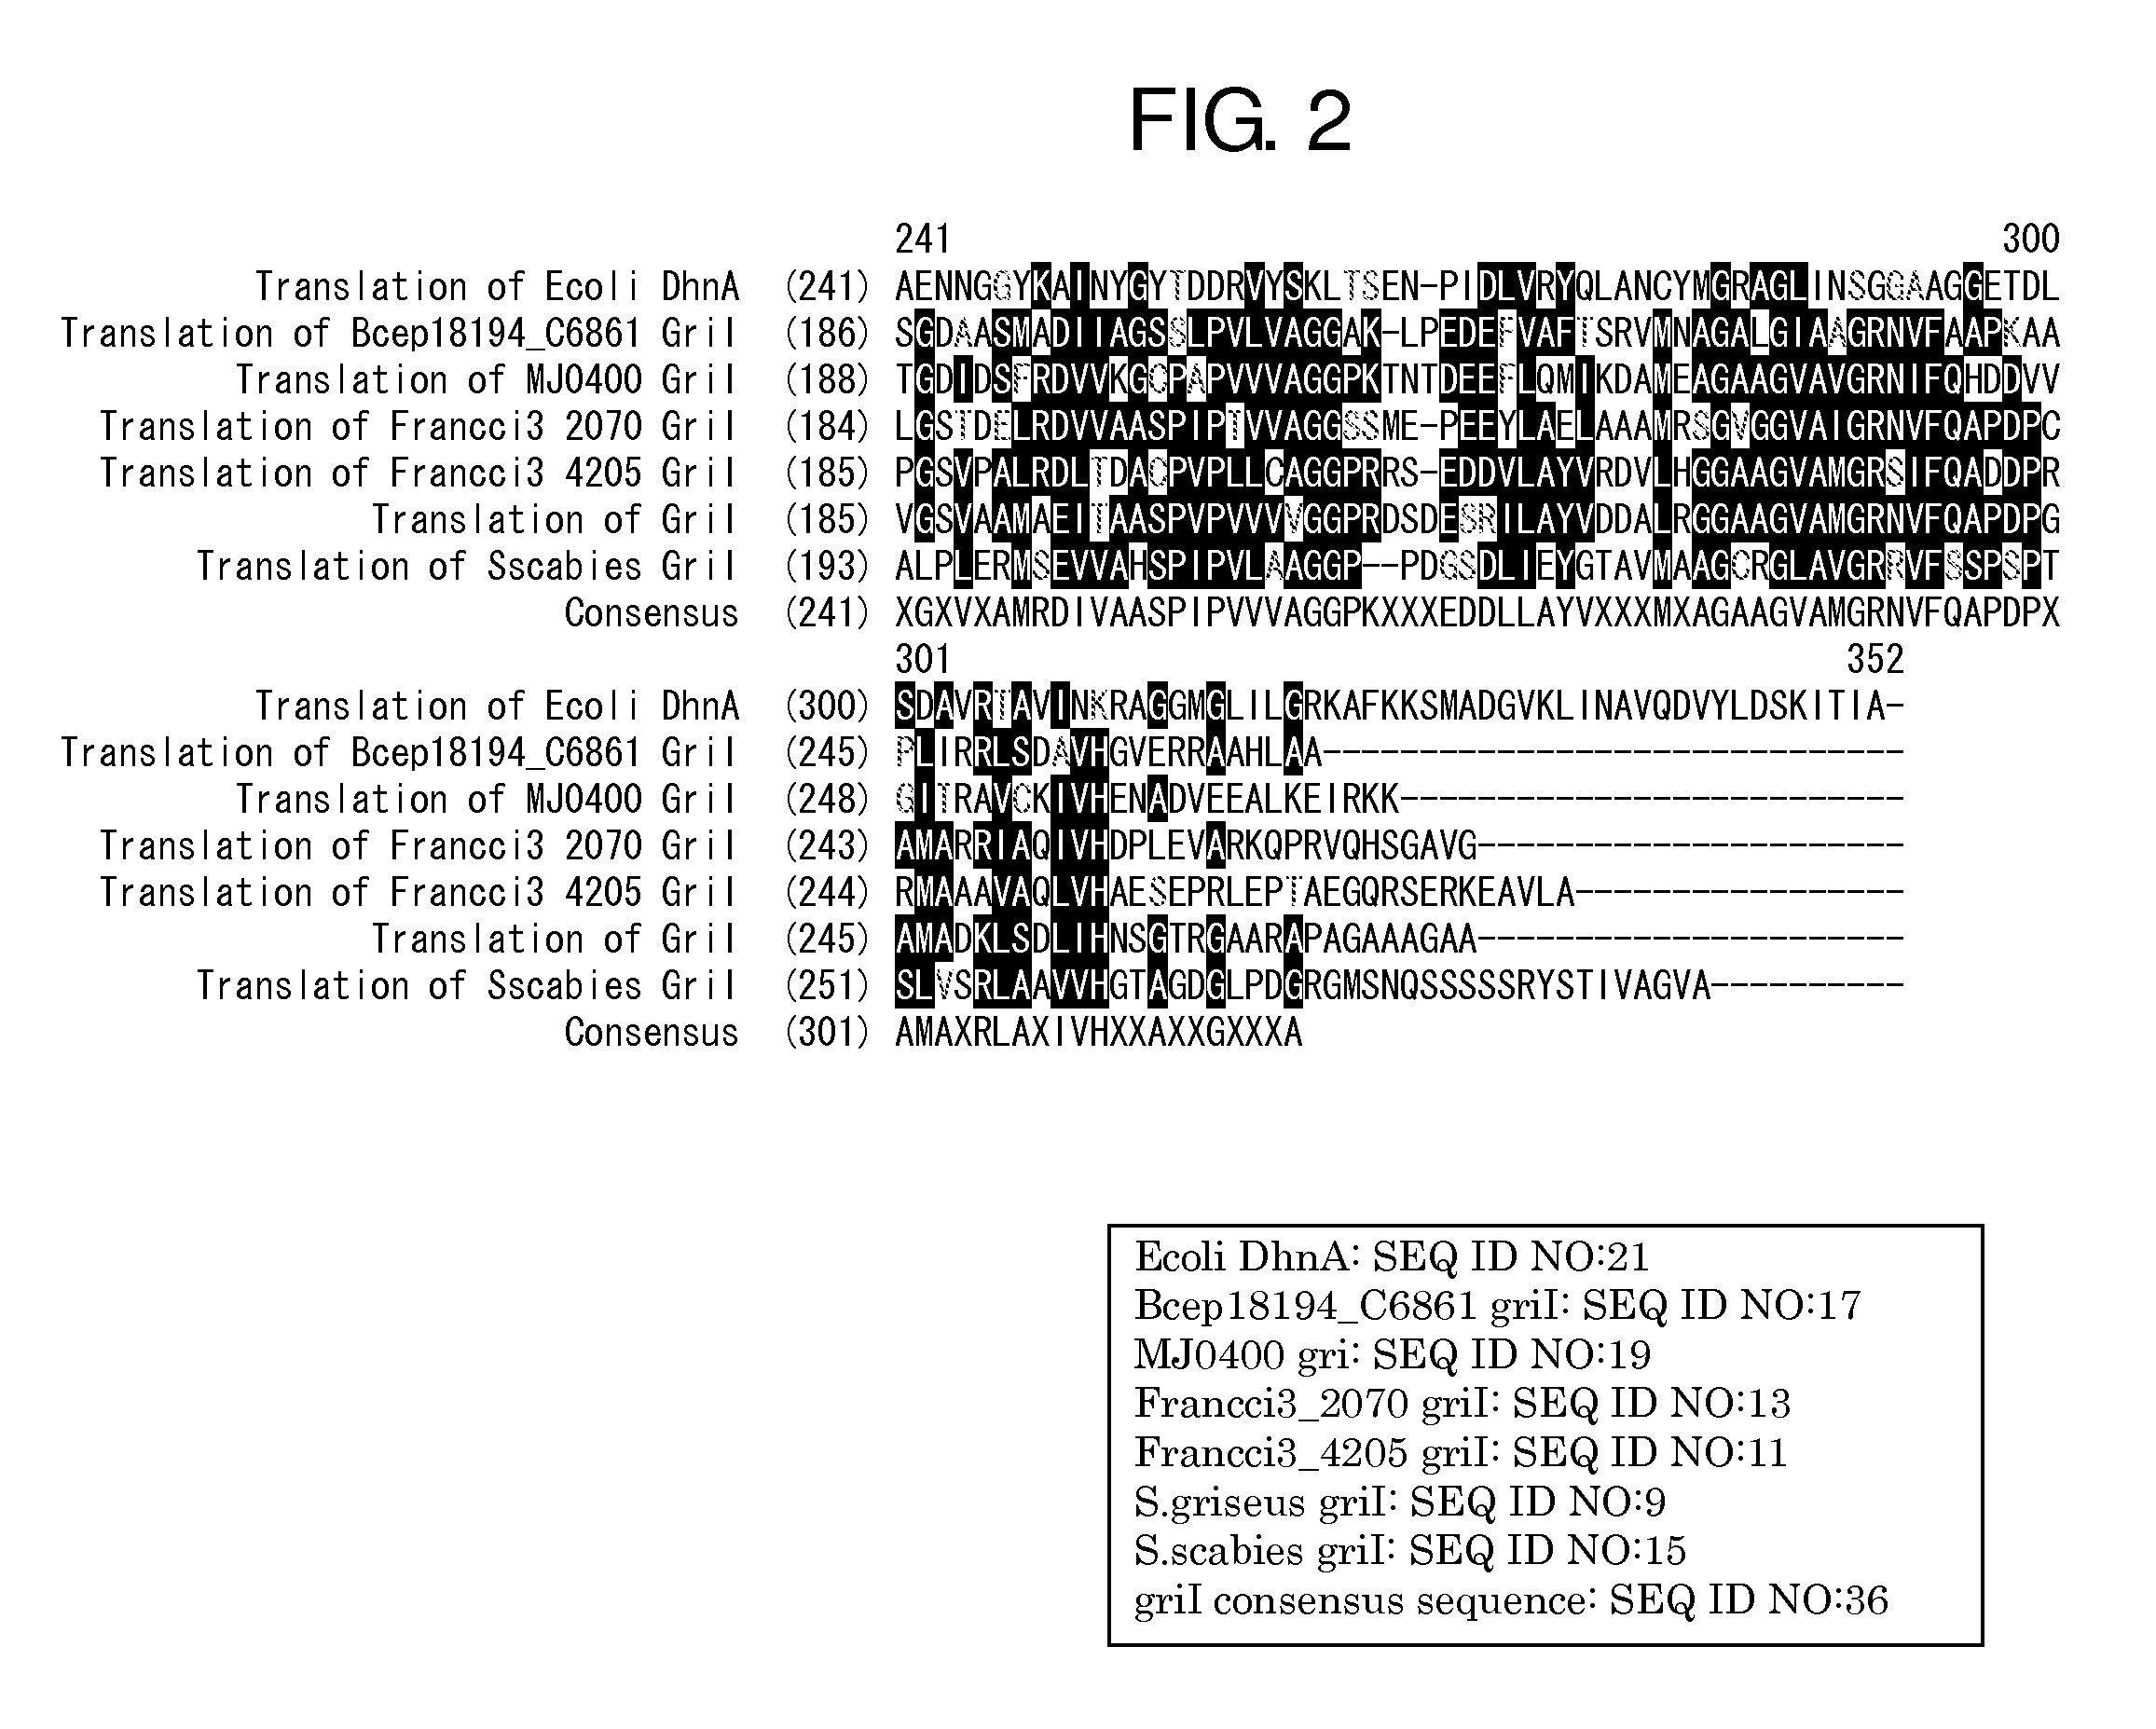 Method for producing an aminohydroxybenzoic acid-type compound